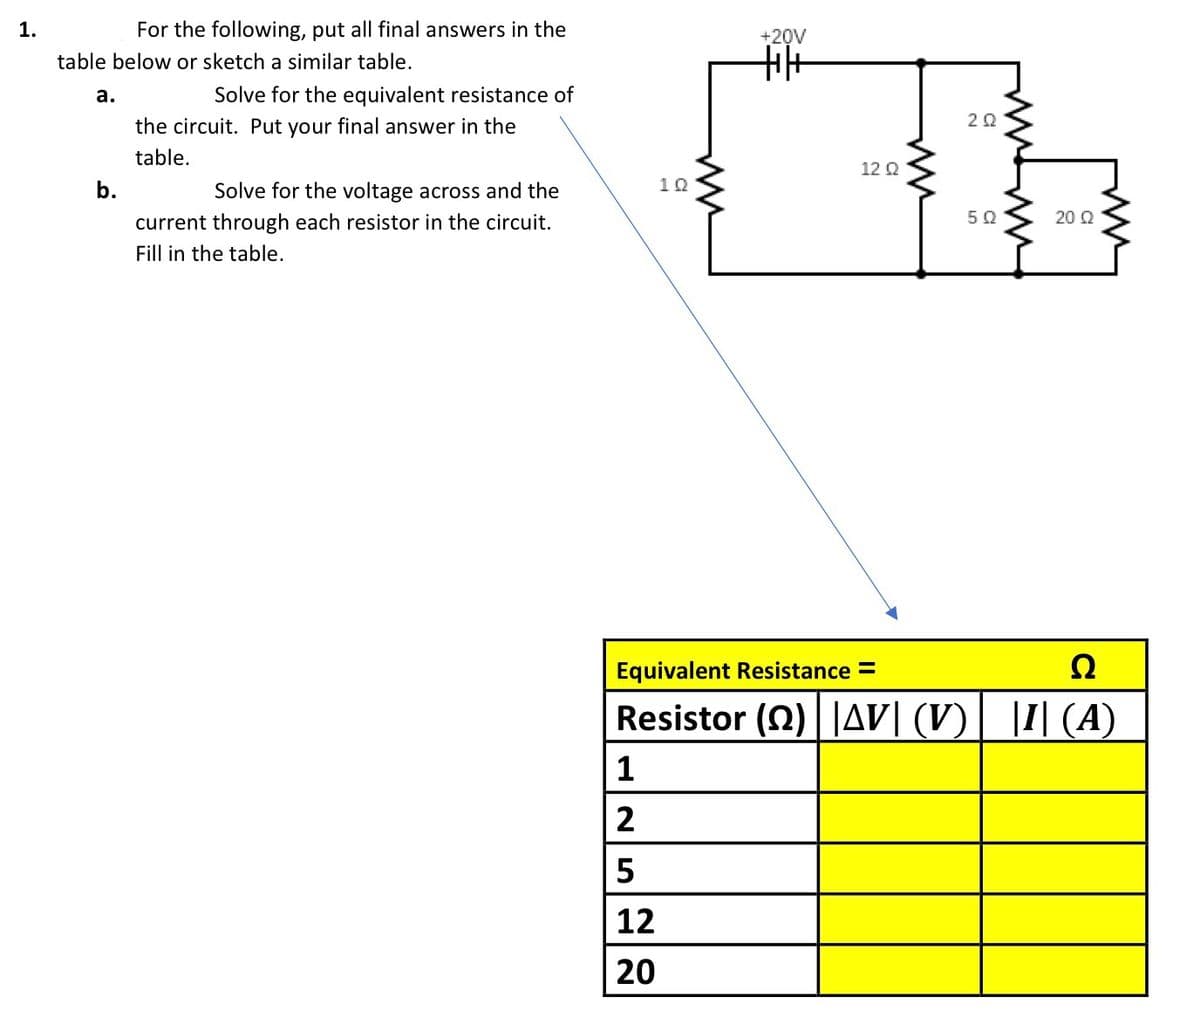 1.
For the following, put all final answers in the
+20V
table below or sketch a similar table.
а.
Solve for the equivalent resistance of
the circuit. Put your final answer in the
table.
12 Q
b.
Solve for the voltage across and the
1Q
20 Q
current through each resistor in the circuit.
Fill in the table.
Equivalent Resistance =
Ω
Resistor (2) ||AV| (V)| |I| (A)
1
5
12
20
